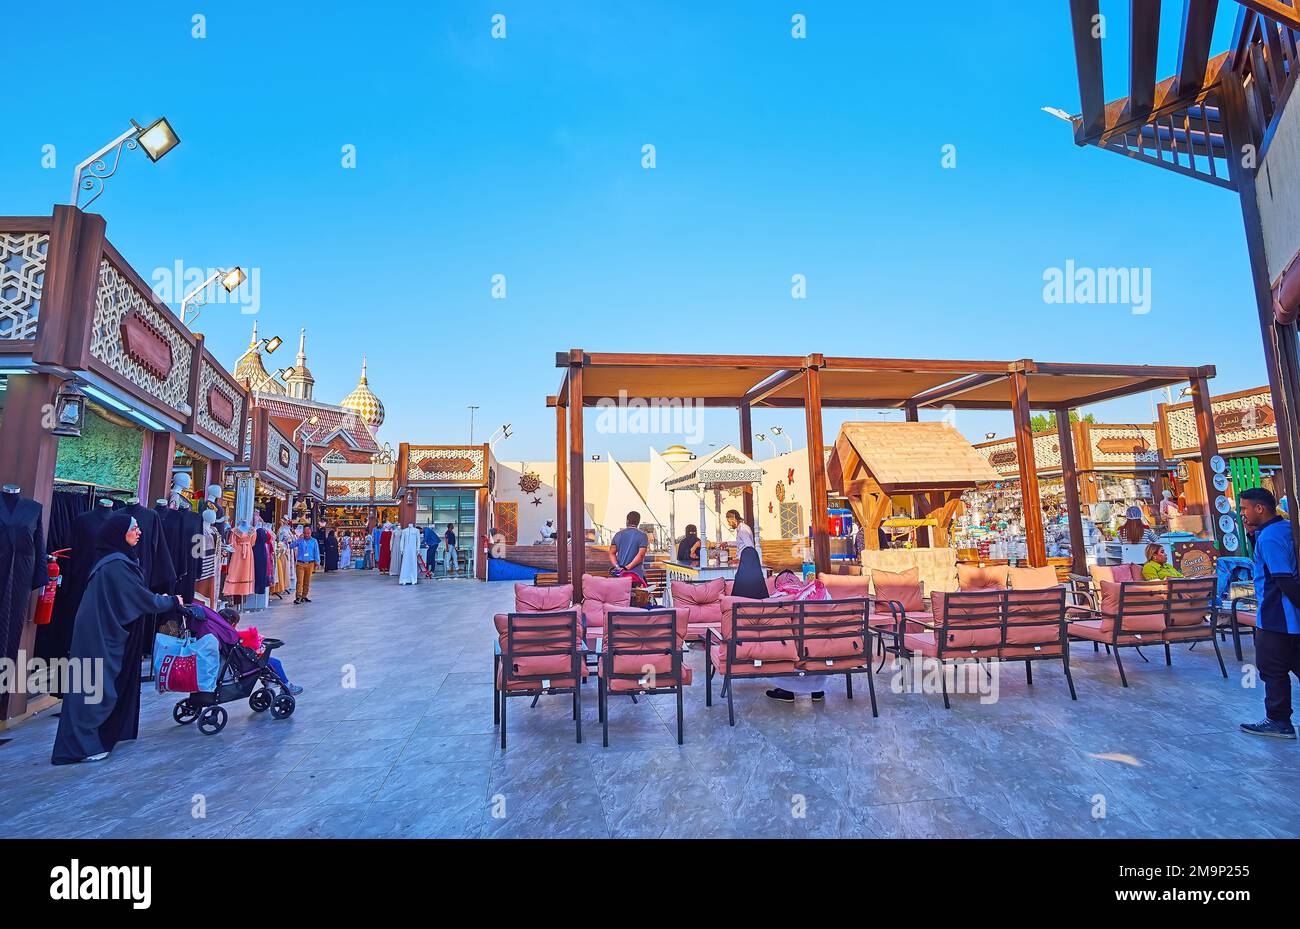 DUBAI, UAE - MARCH 6, 2020: The shops, outdoor cafe and pedestrian area in Kuwait Pavilion of Global Village Dubai, on March 6 in Dubai Stock Photo